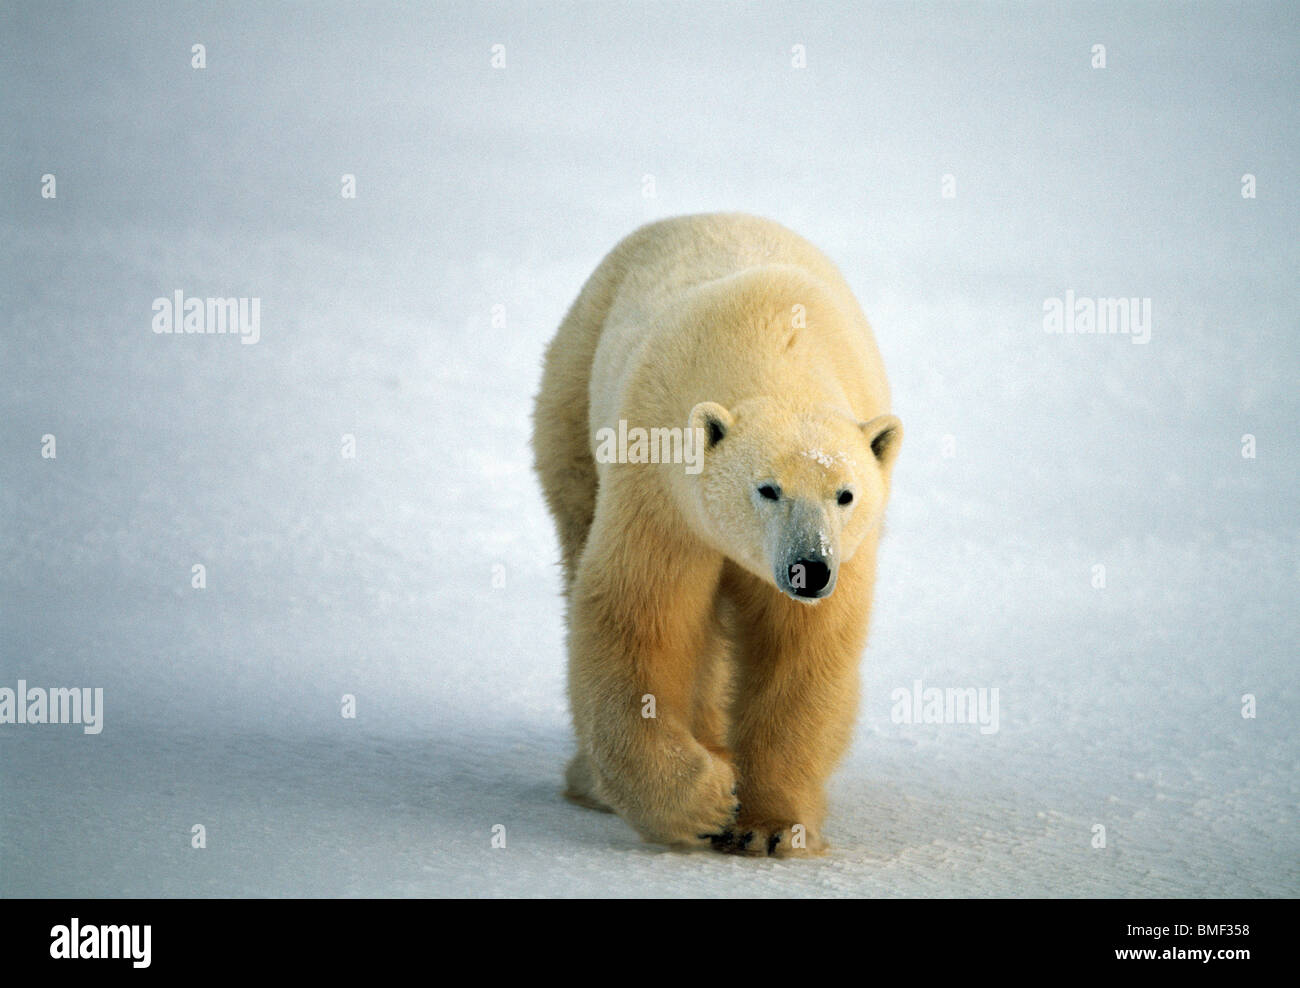 L'ours polaire, Cape Churchill, Manitoba, Canada. Banque D'Images